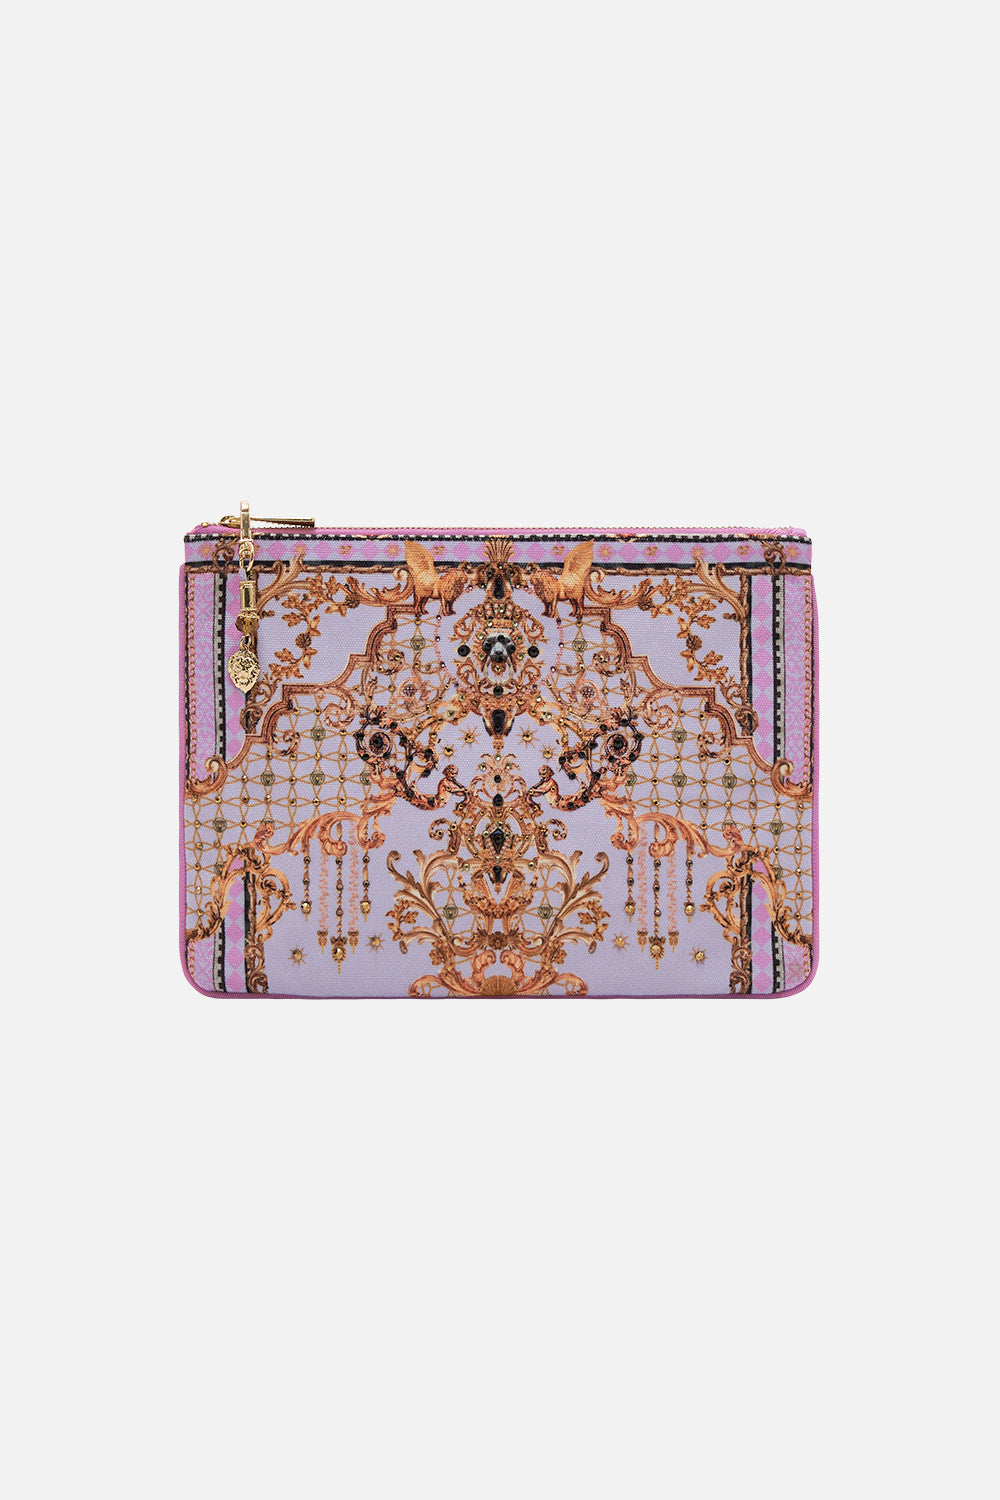 Product view of CAMILLA printed clutch in Lavender Ever After print